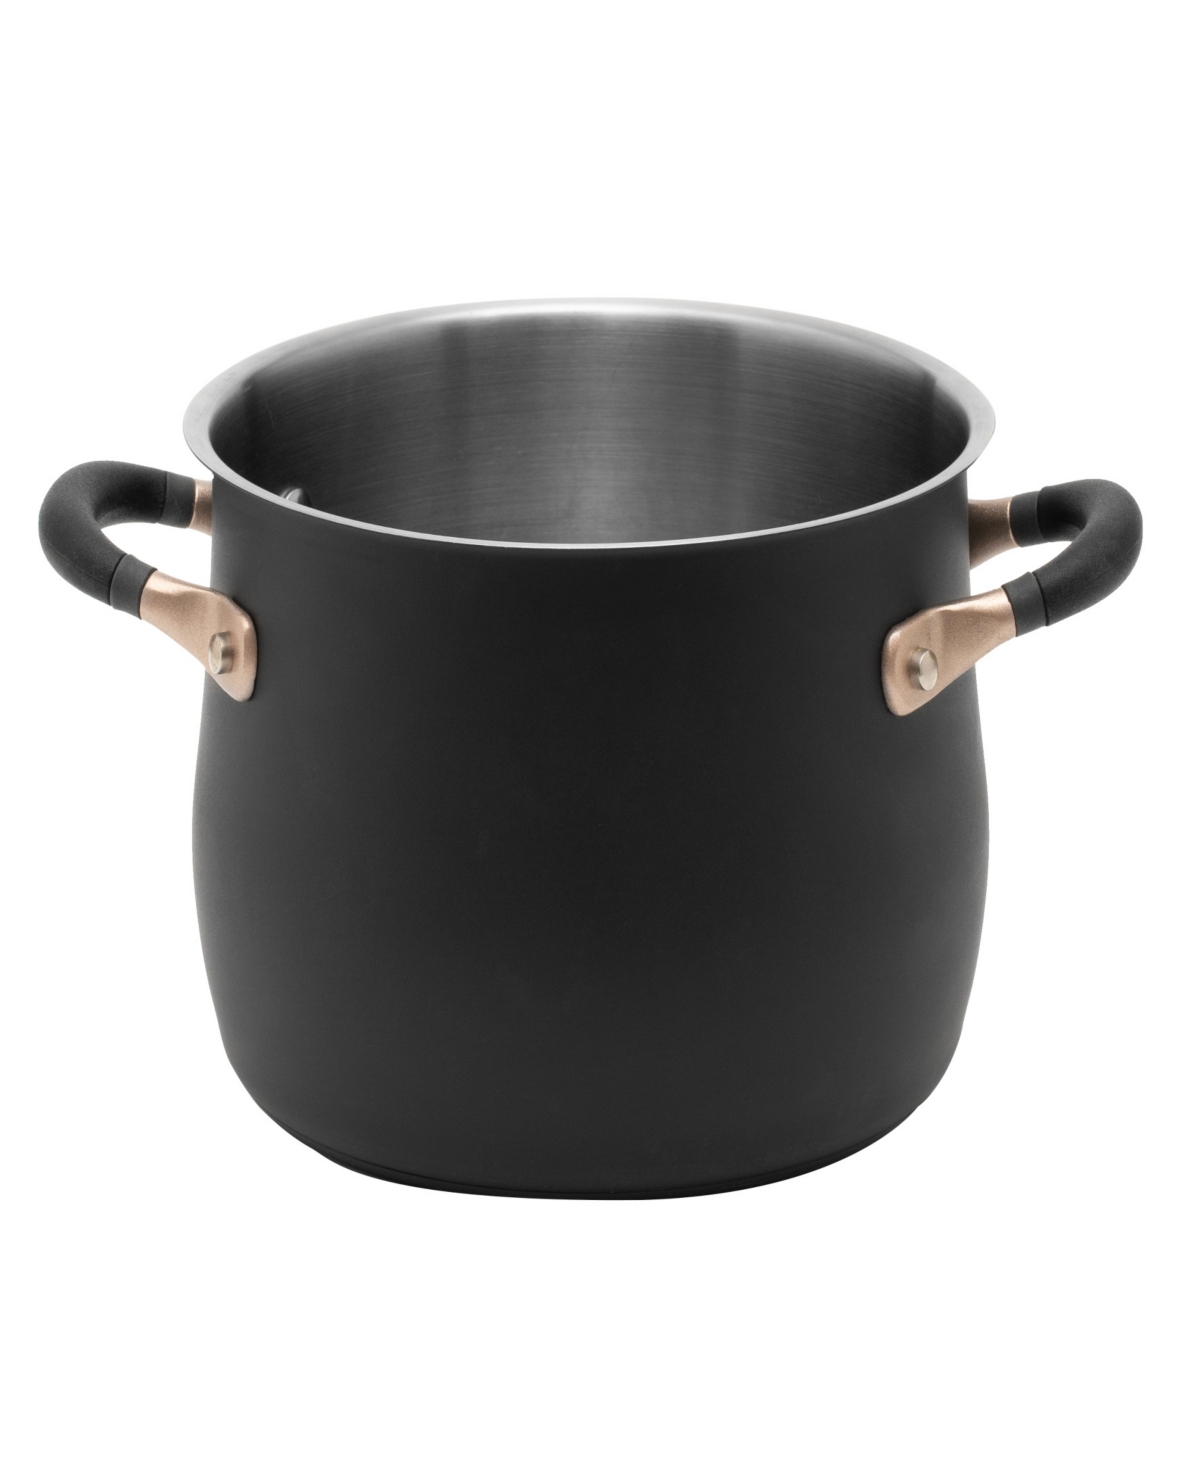 Meyer Accent Series Stainless Steel 5-quart Stockpot In Matte Black With Gold Accent